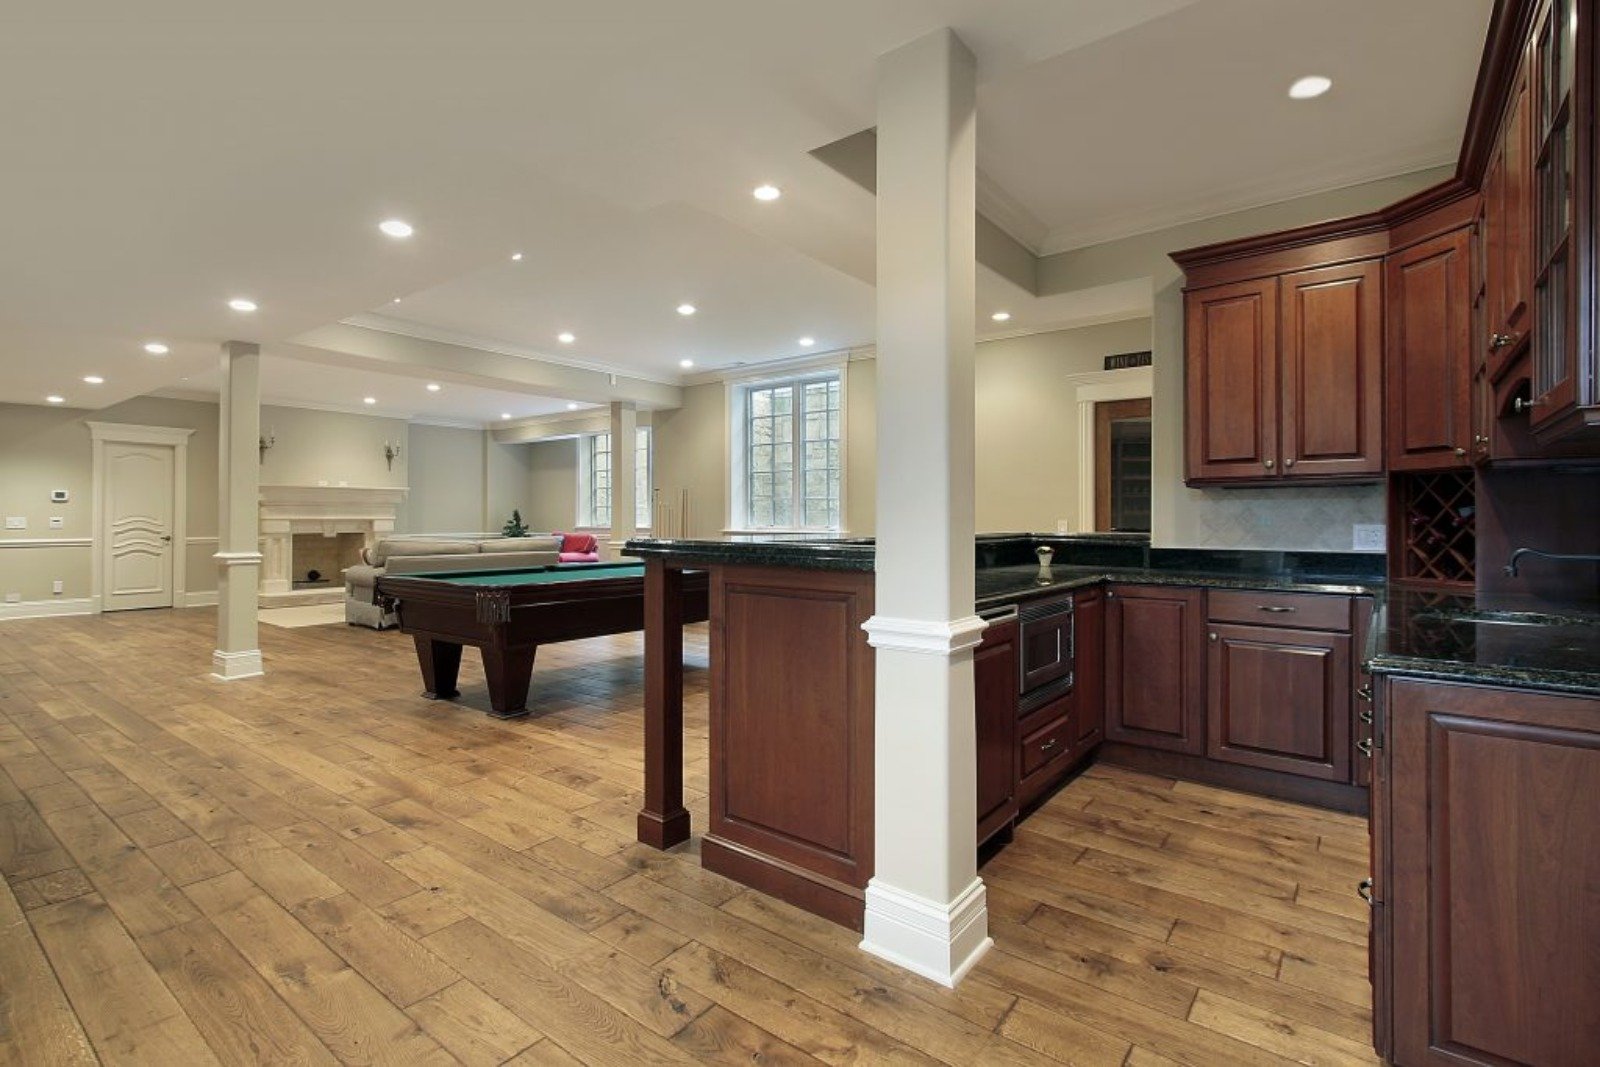 General Contractor Services in Exton PA